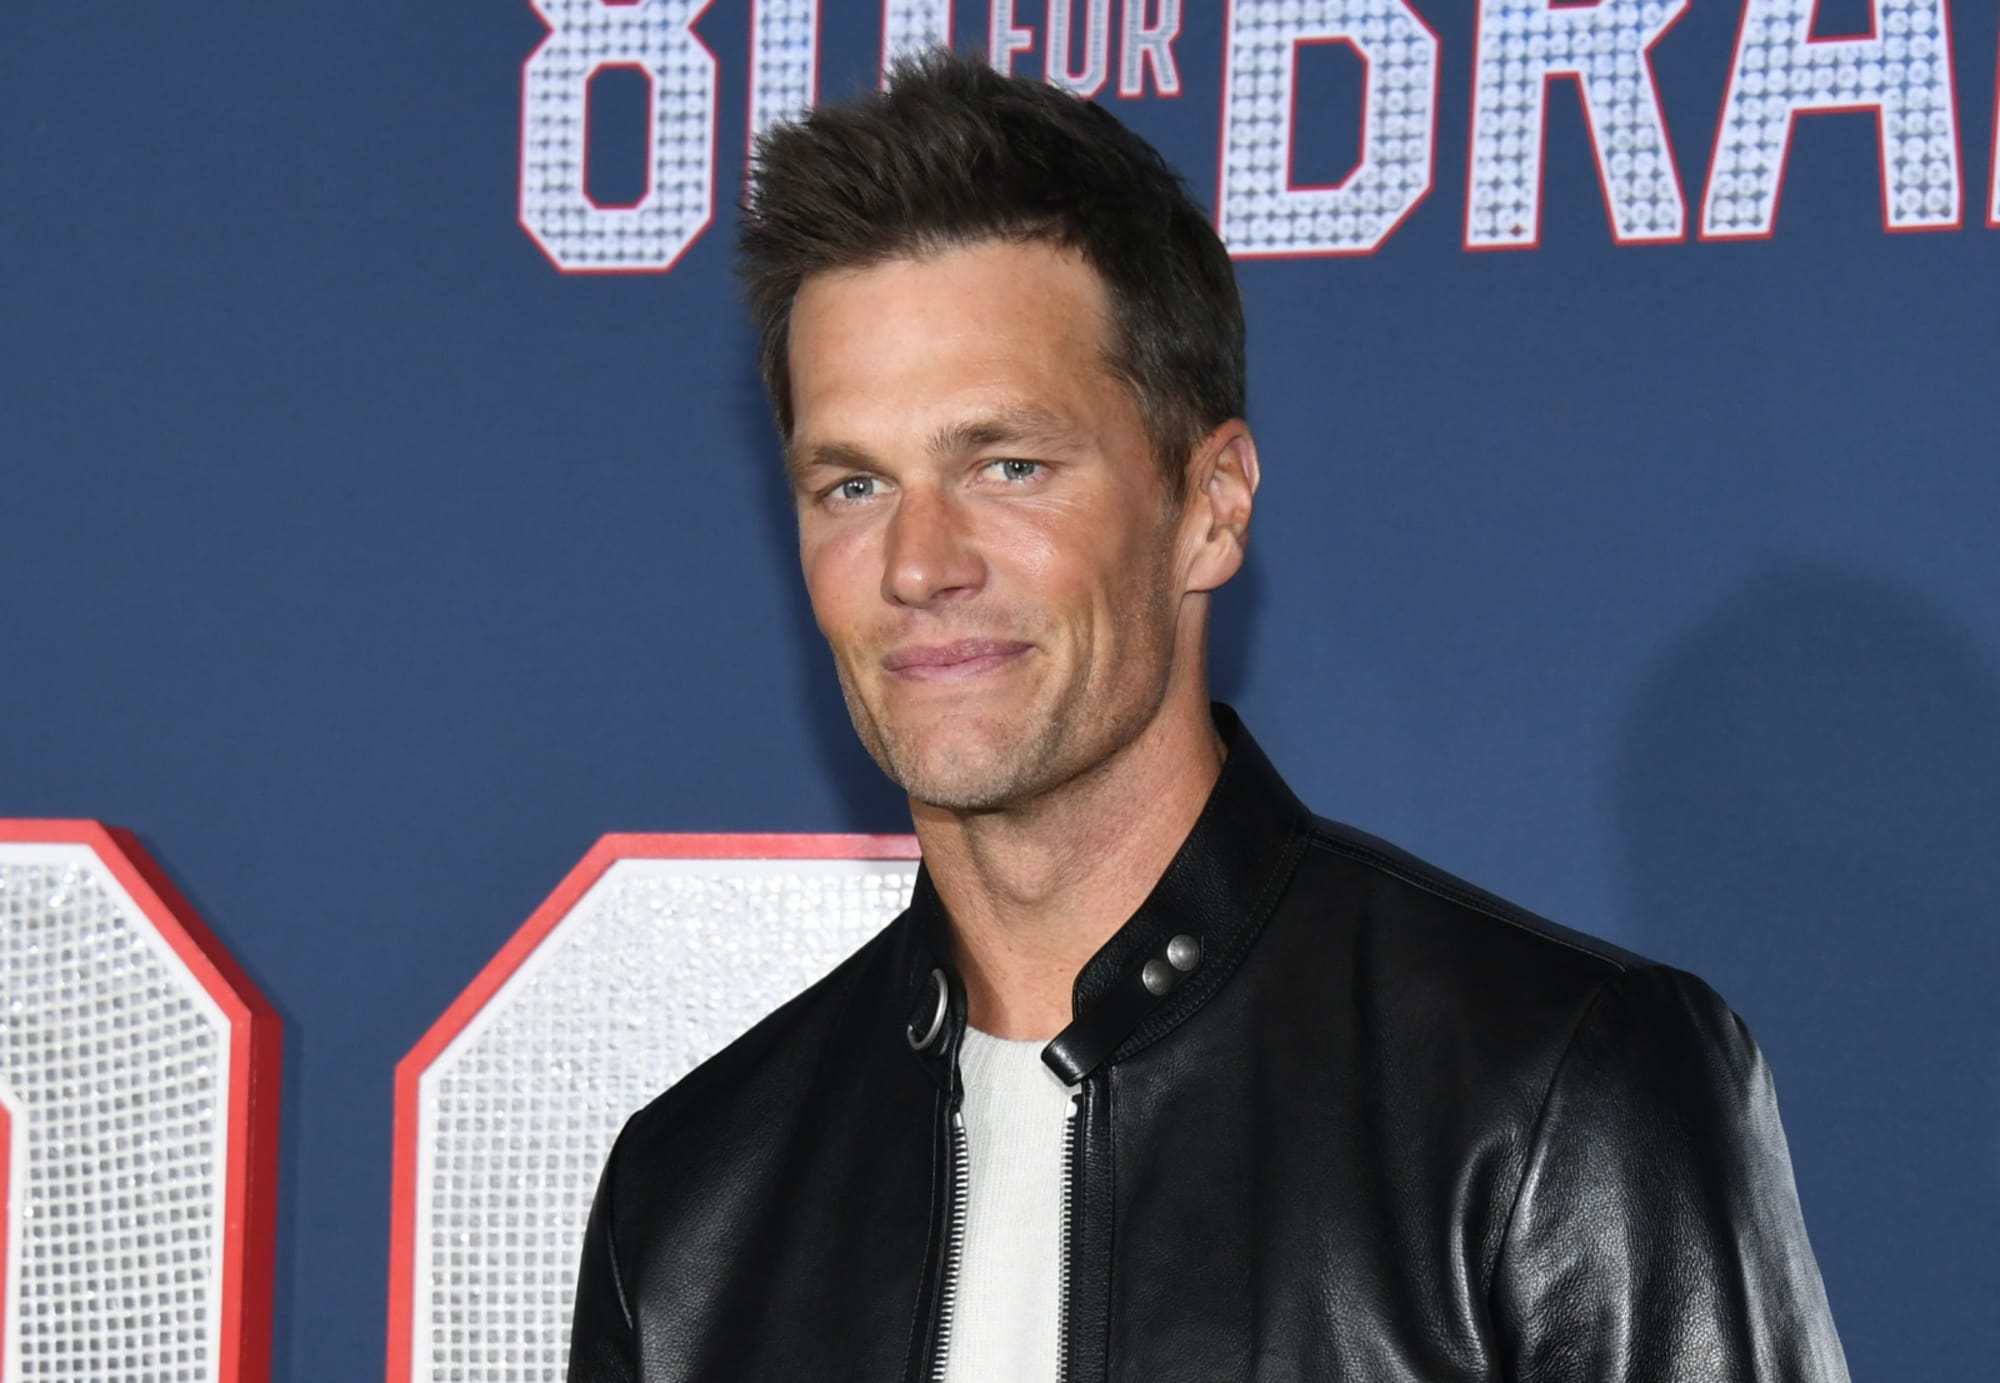 Tom Brady net worth and family life: Everything to know about post-playing career